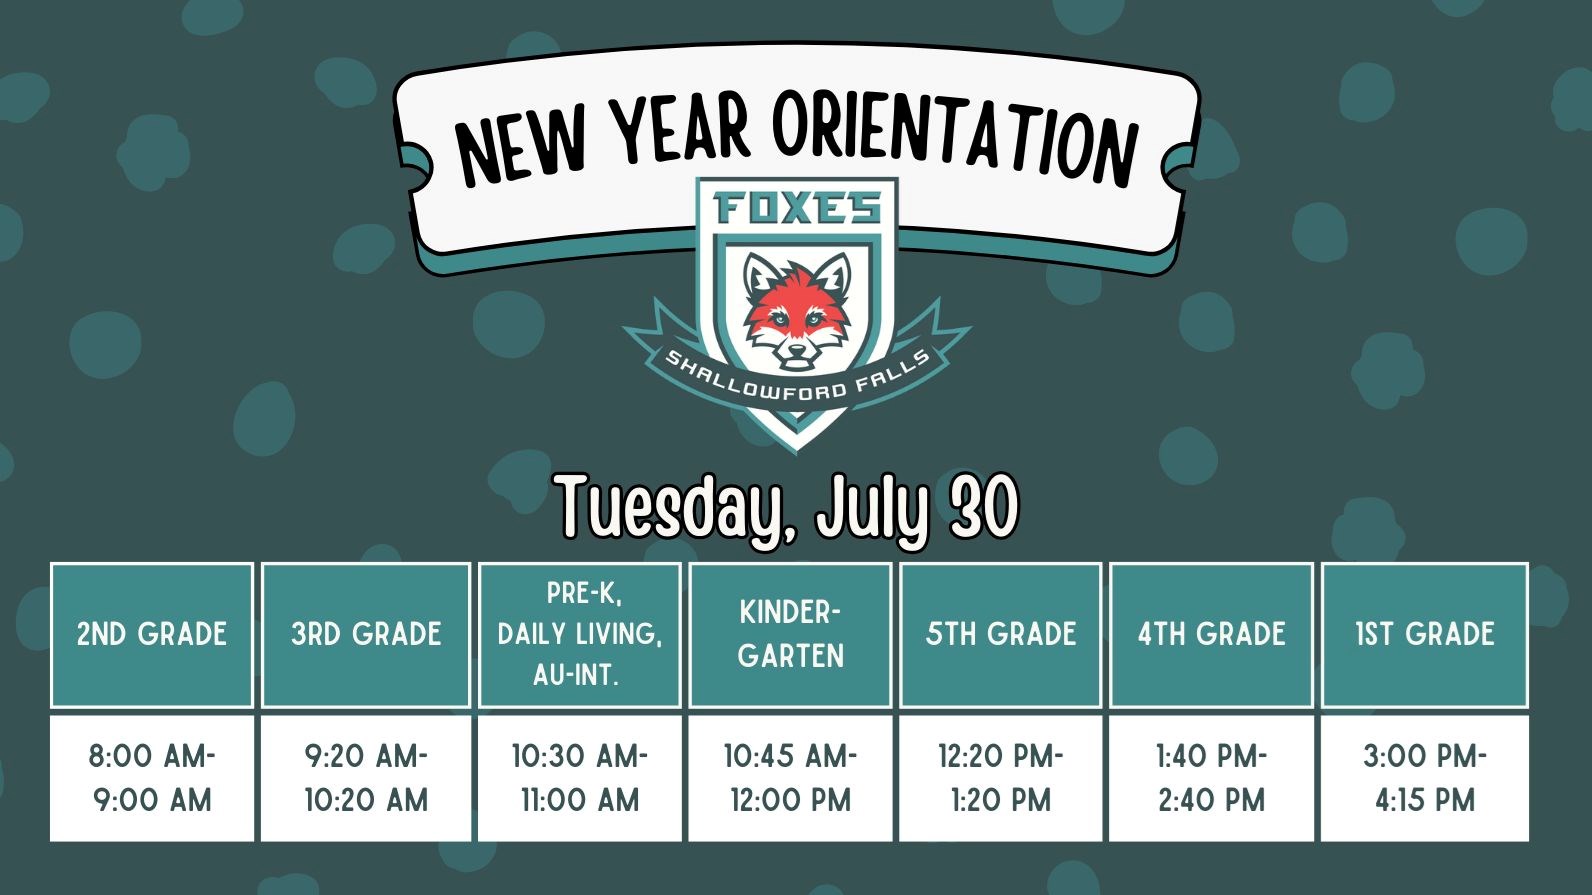 New Year Orientation Tuesday, July 30